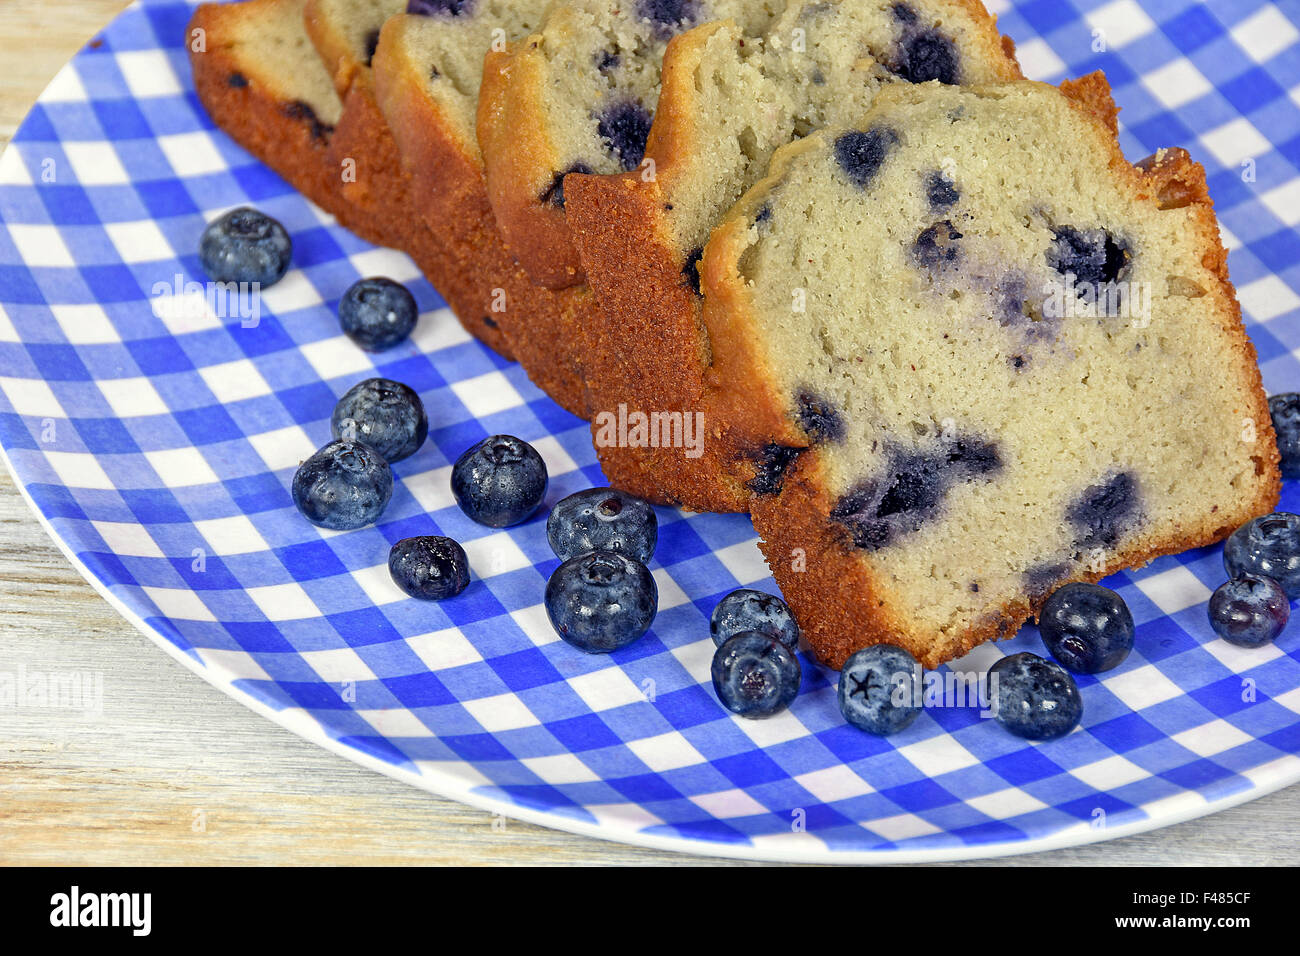 Sliced blueberry bread with ripe blueberries on blue and white checkered plate. Stock Photo